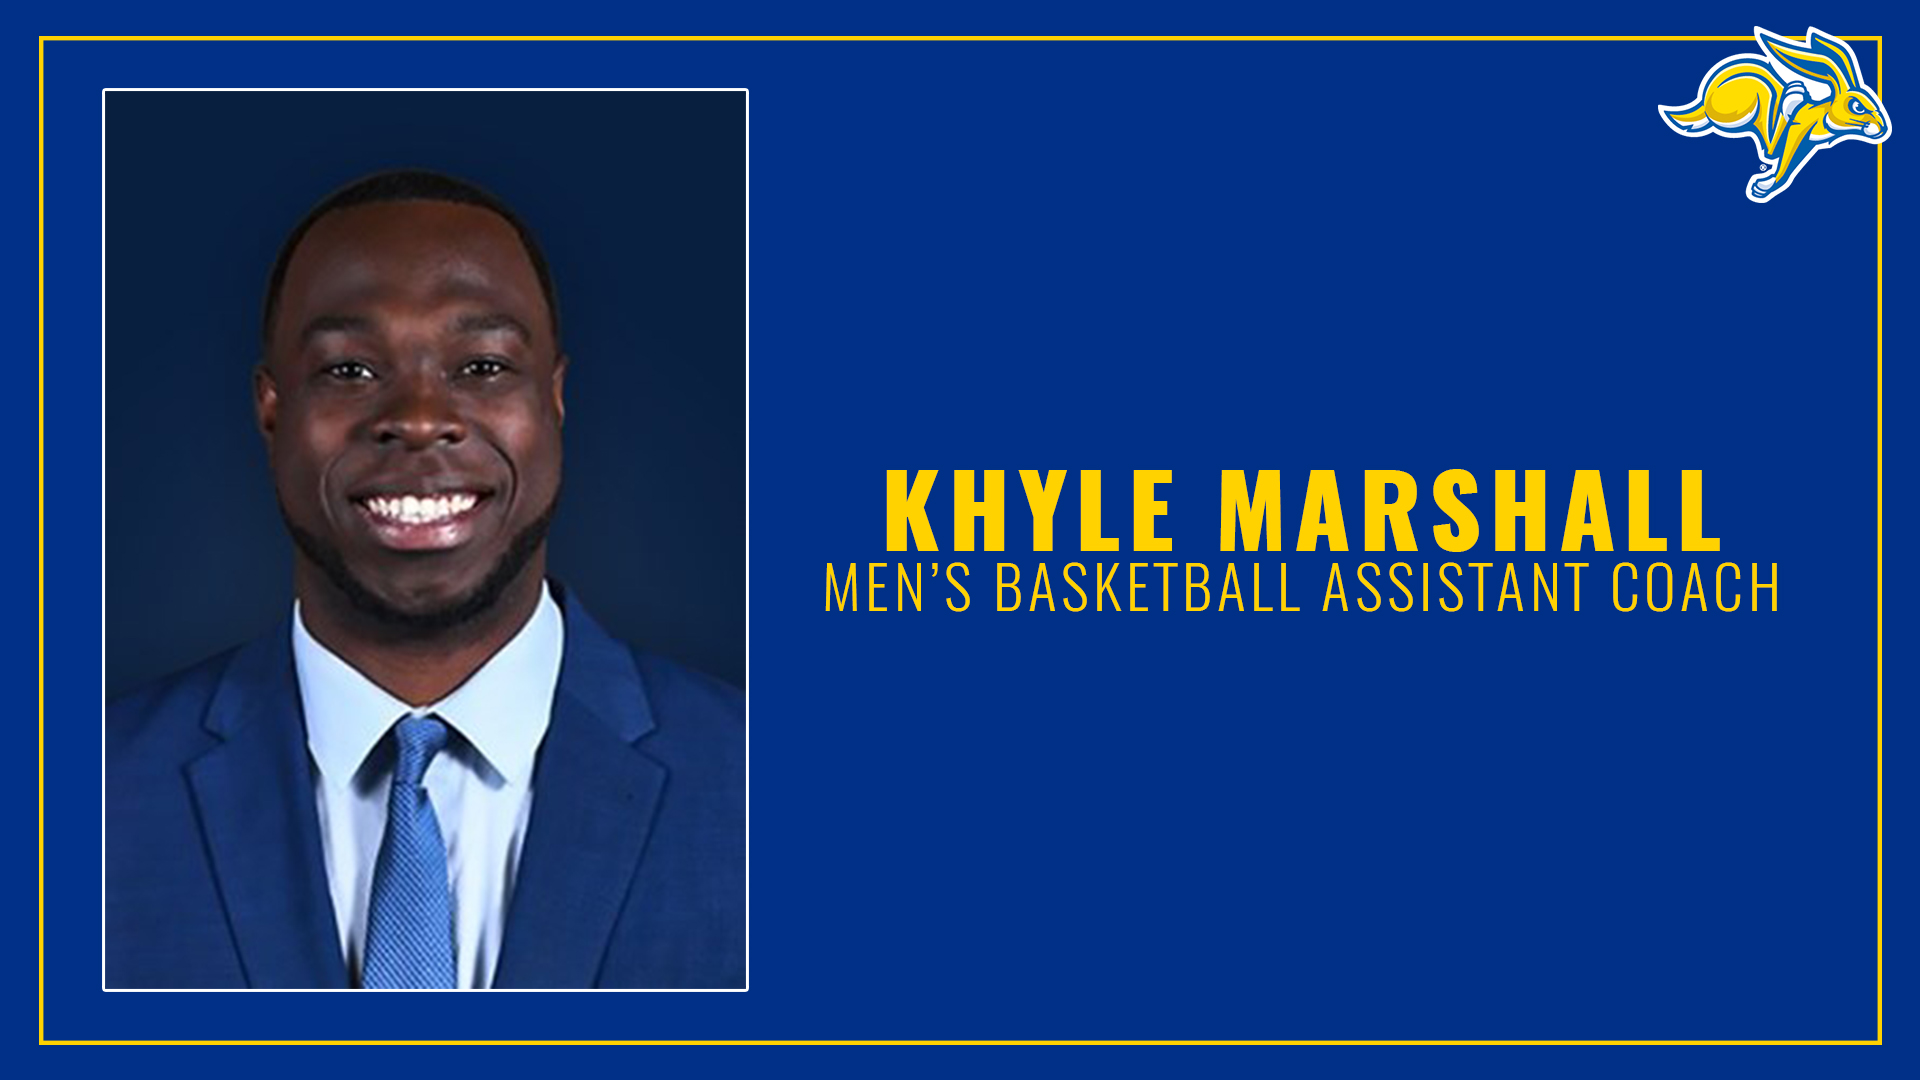 Jackrabbit Basketball on Twitter: "We're excited to welcome new assistant  coach @KhyleMarshall23 to Brookings! 📰 » https://t.co/btrwEGRY1G  https://t.co/q4n7qn3u3i" / Twitter